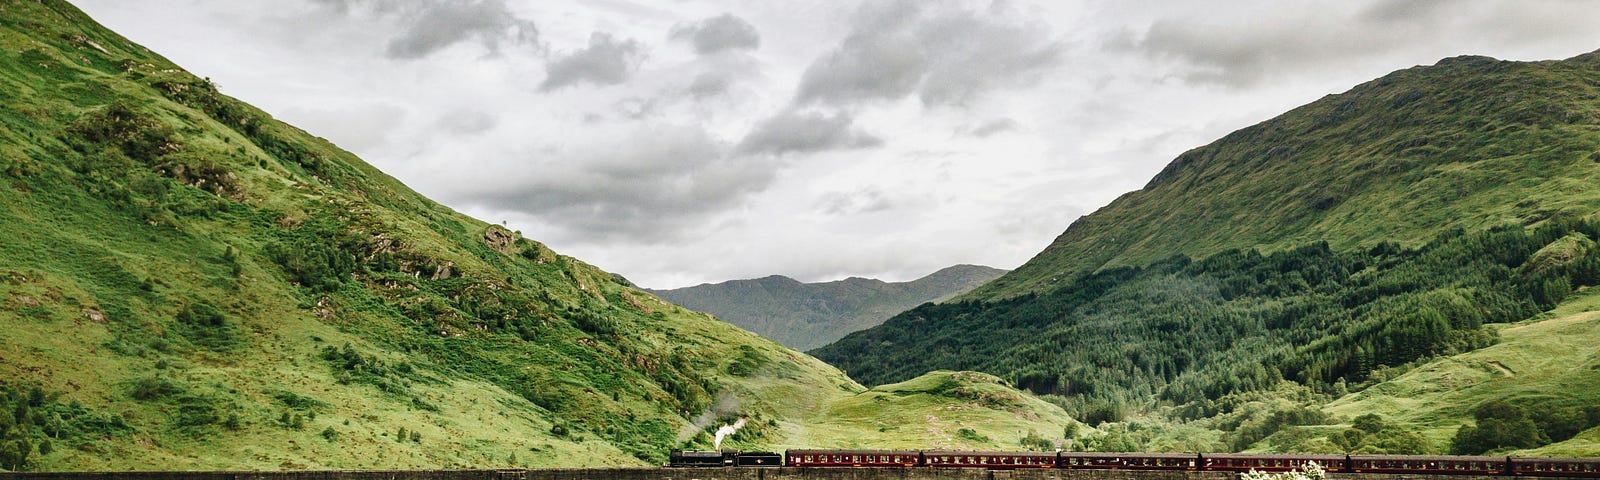 Steam train on a bridge with a Scottish mountainous, green landscape in the background.